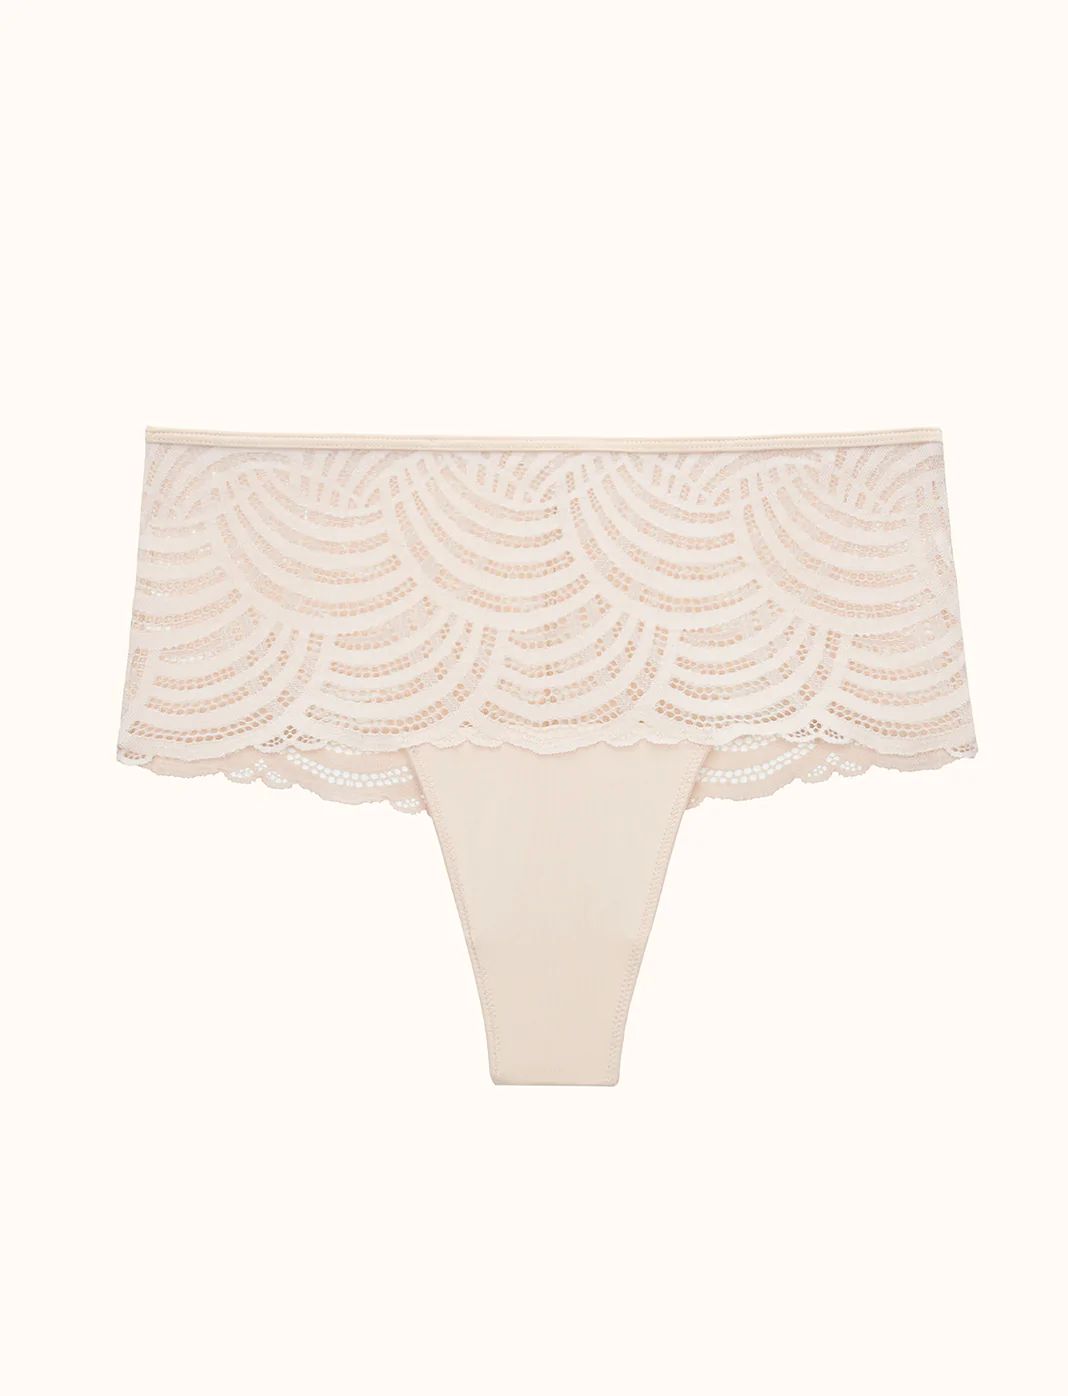 Deco Lace High Rise Thong | ThirdLove